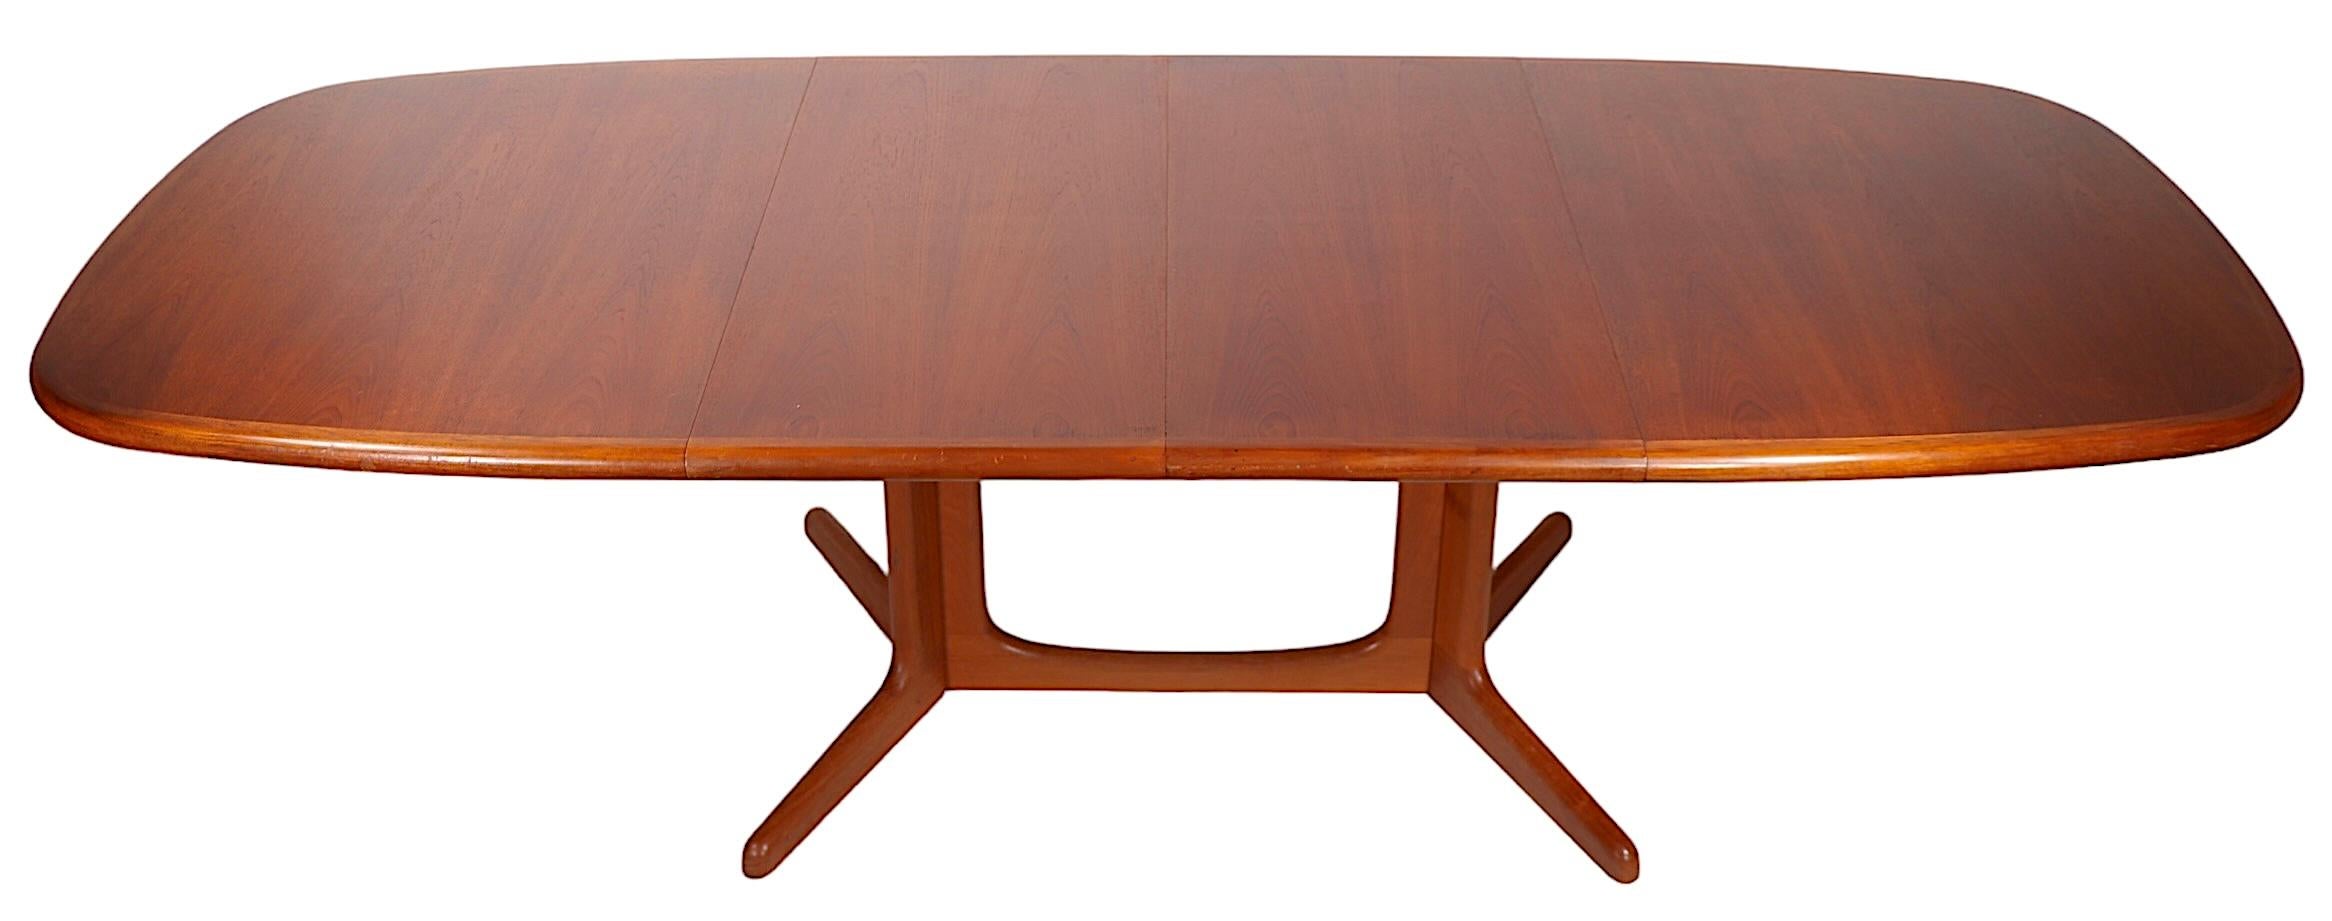 Danish Mid Century Oval Teak Dining Table by Niels Otto Moller for Gudme c 1970s For Sale 8